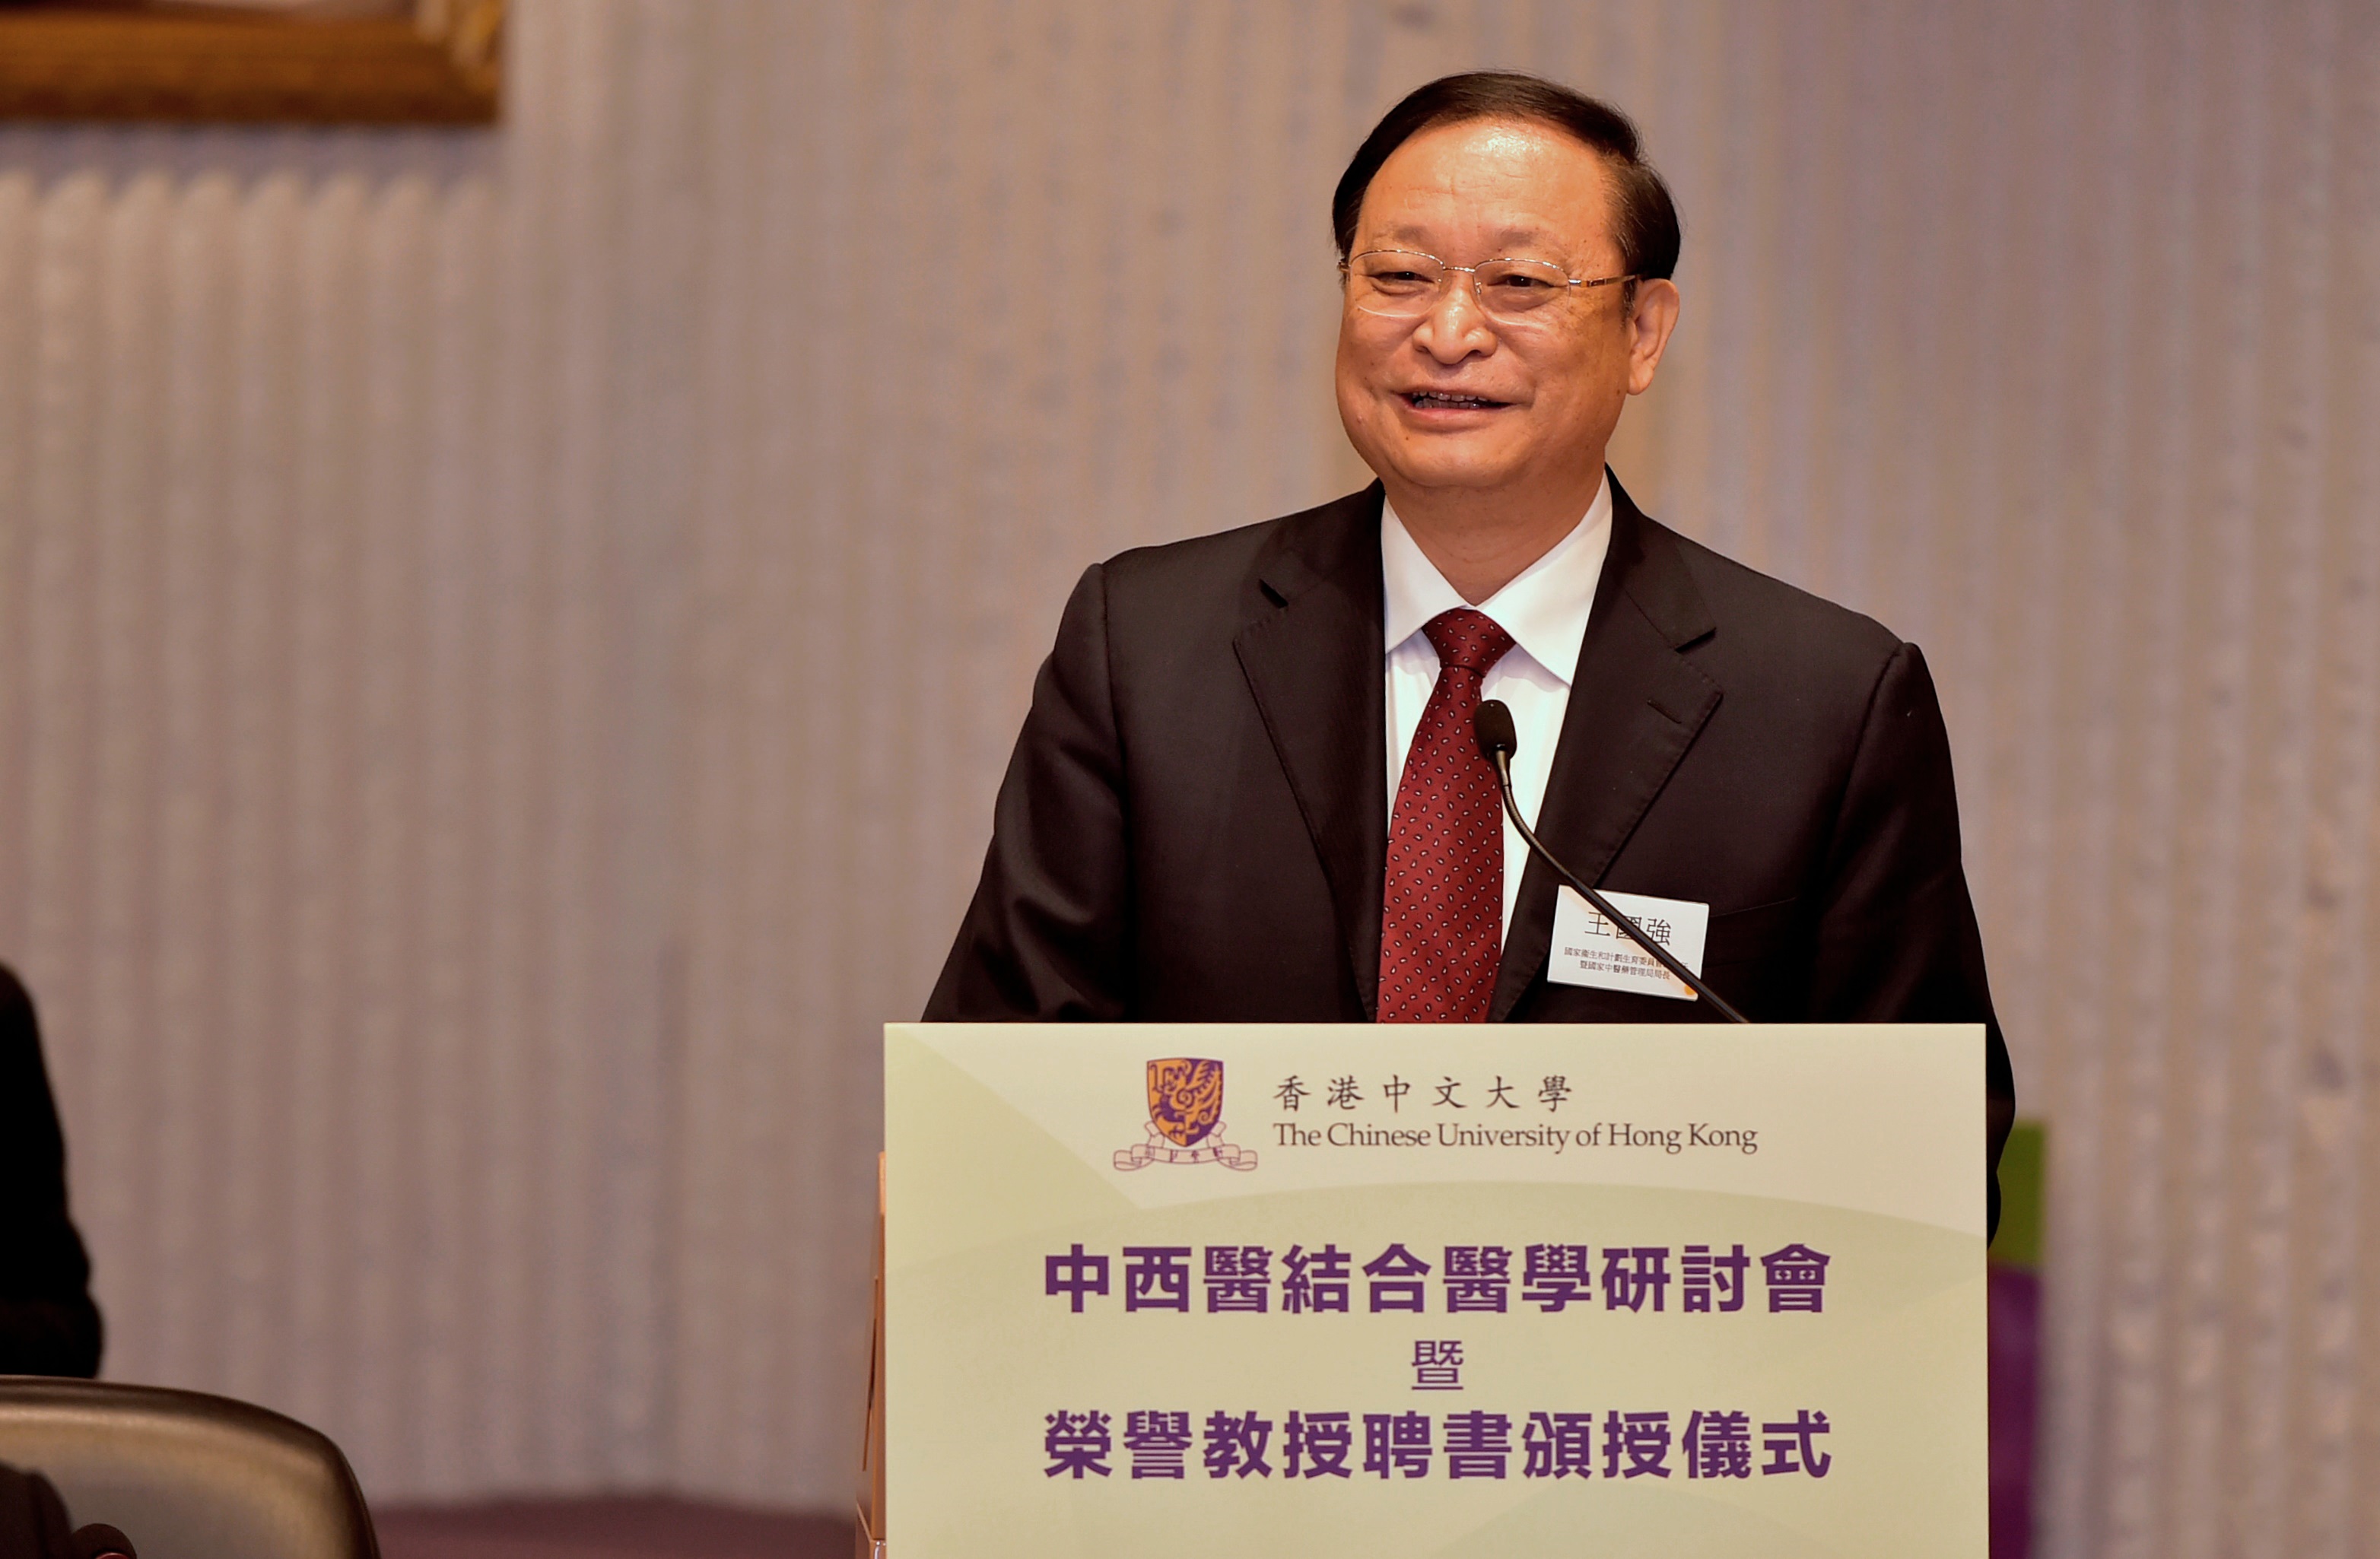 Prof. Wang Guoqiang, Vice Minister of the National Health